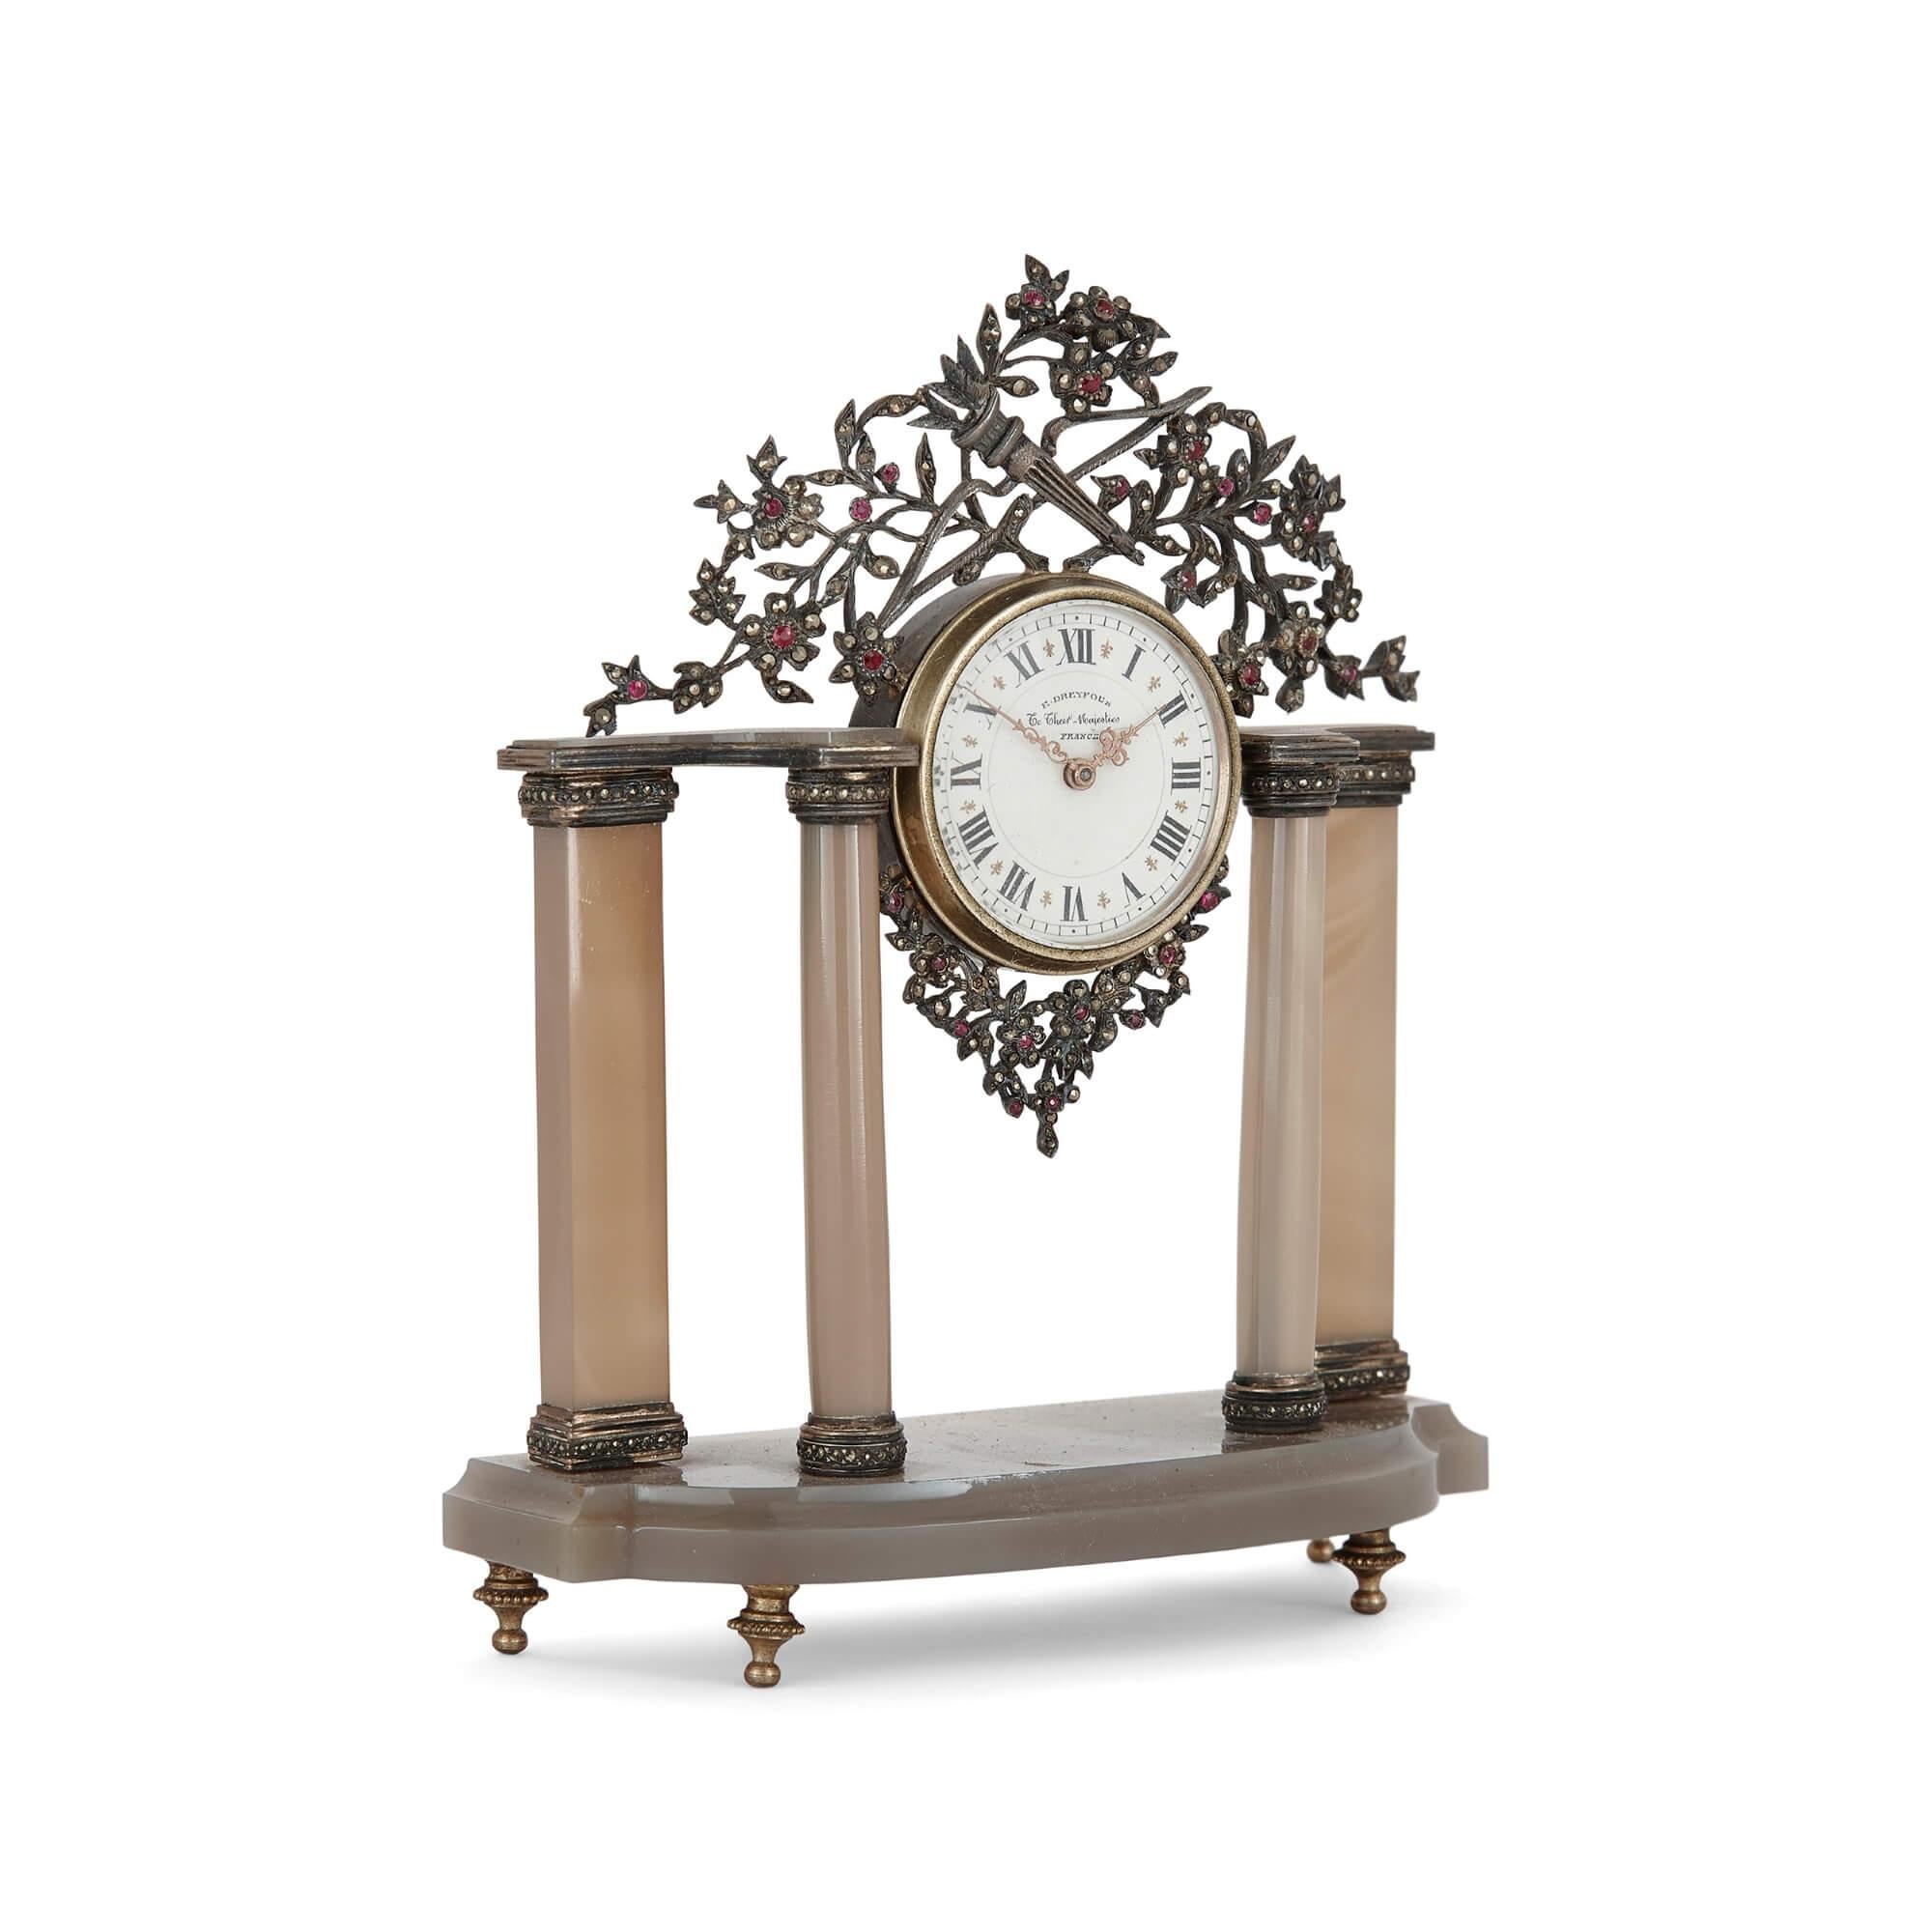 This delicate table clock features a surmounting design of silver foliate and flowers, which are mounted with precious stones. Held centrally within the silver flowers is the circular clock dial, which features a gilt border and black Roman numerals